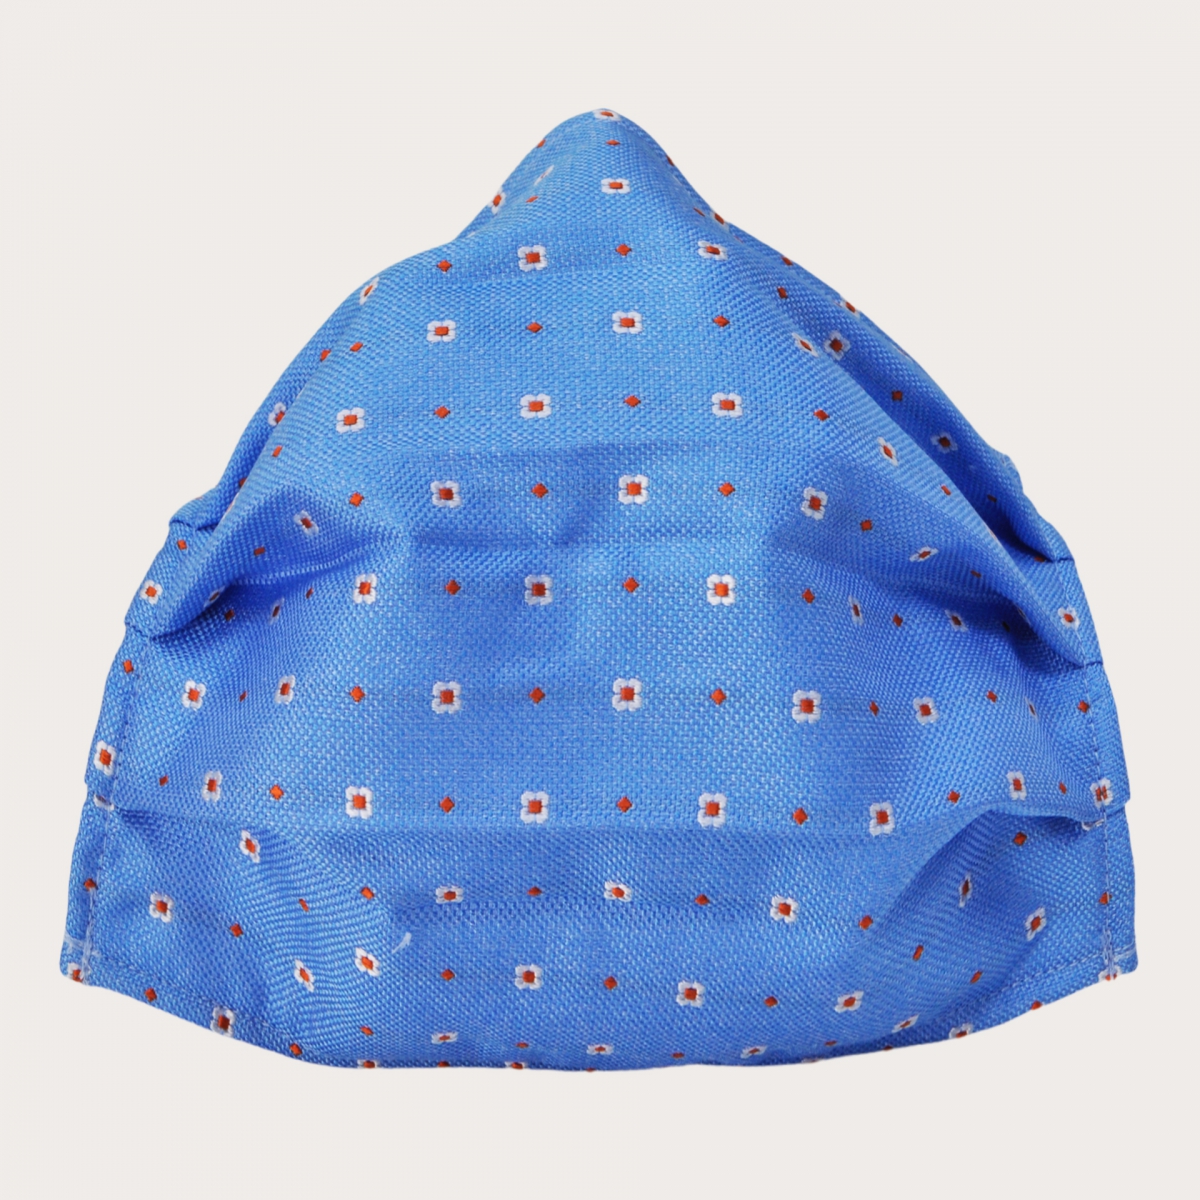 Silk protective facemask, blue pattern with flowers